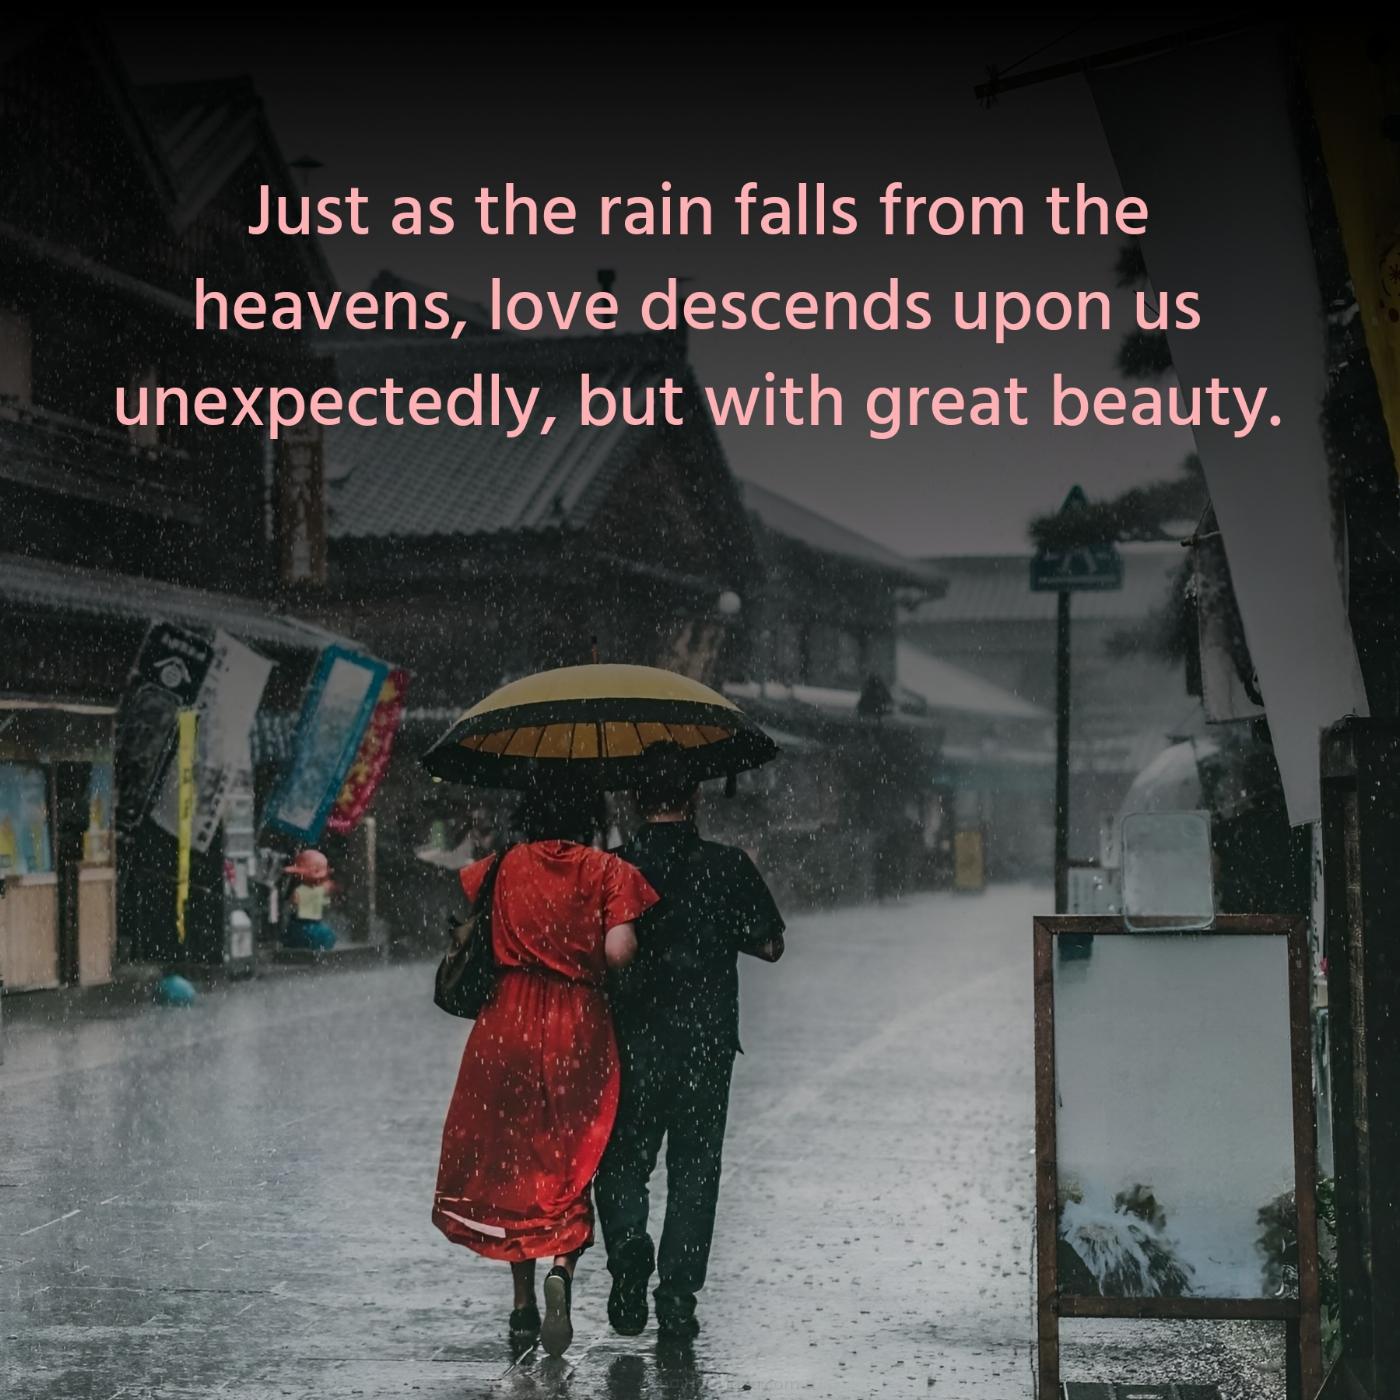 Just as the rain falls from the heavens love descends upon us